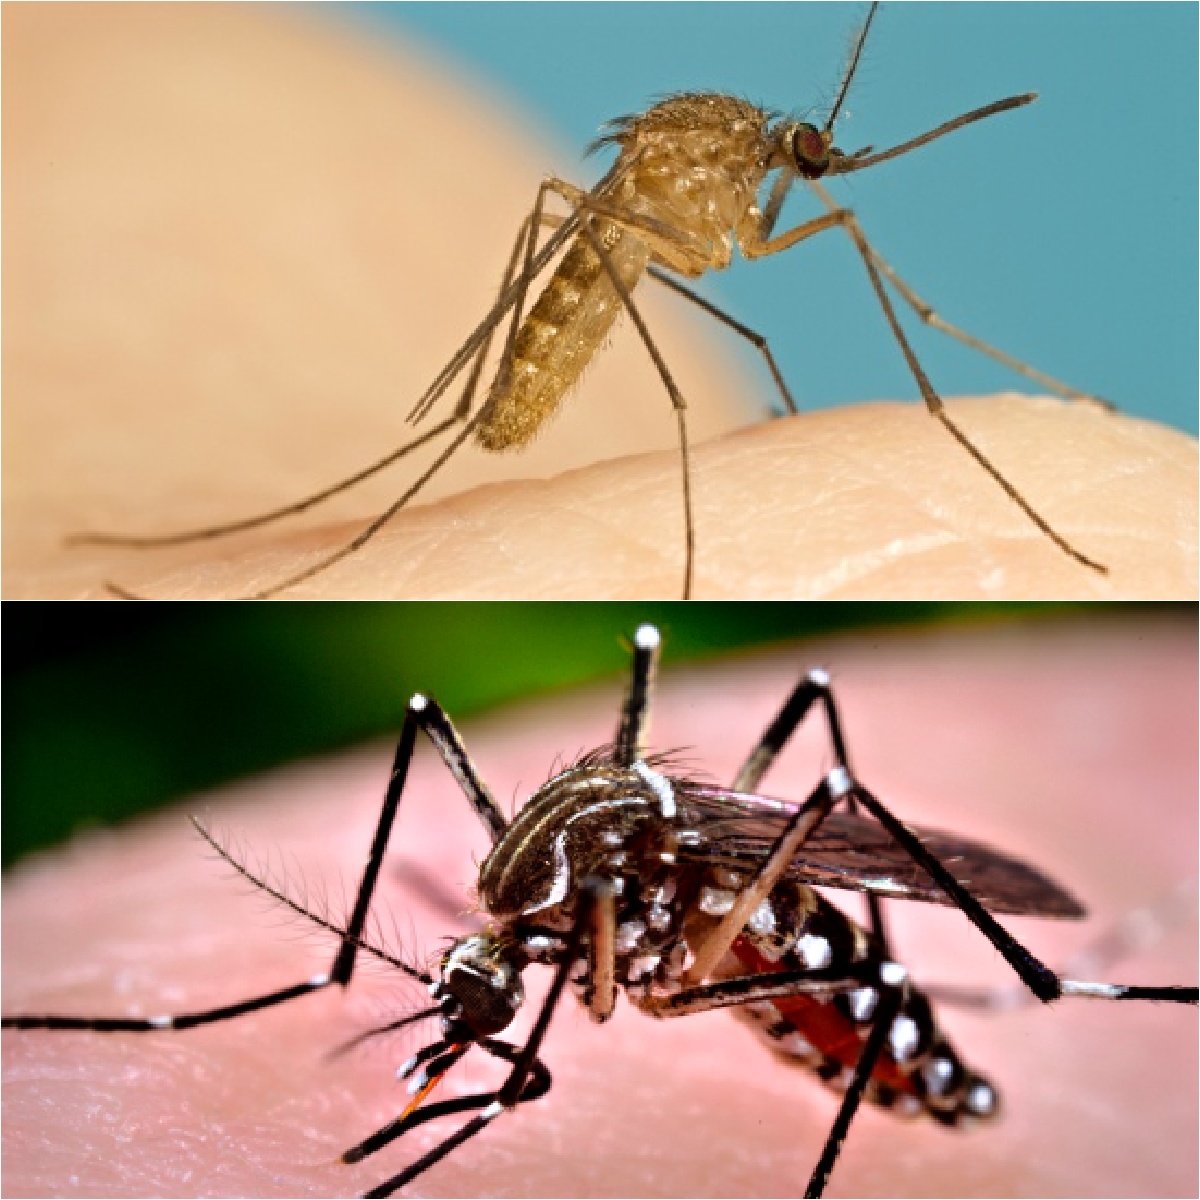 KNOW YOUR 'SQUITOES -- Native mosquitoes of the Culex genus (on top) and invasive Aedea genus (bottom) spell trouble.